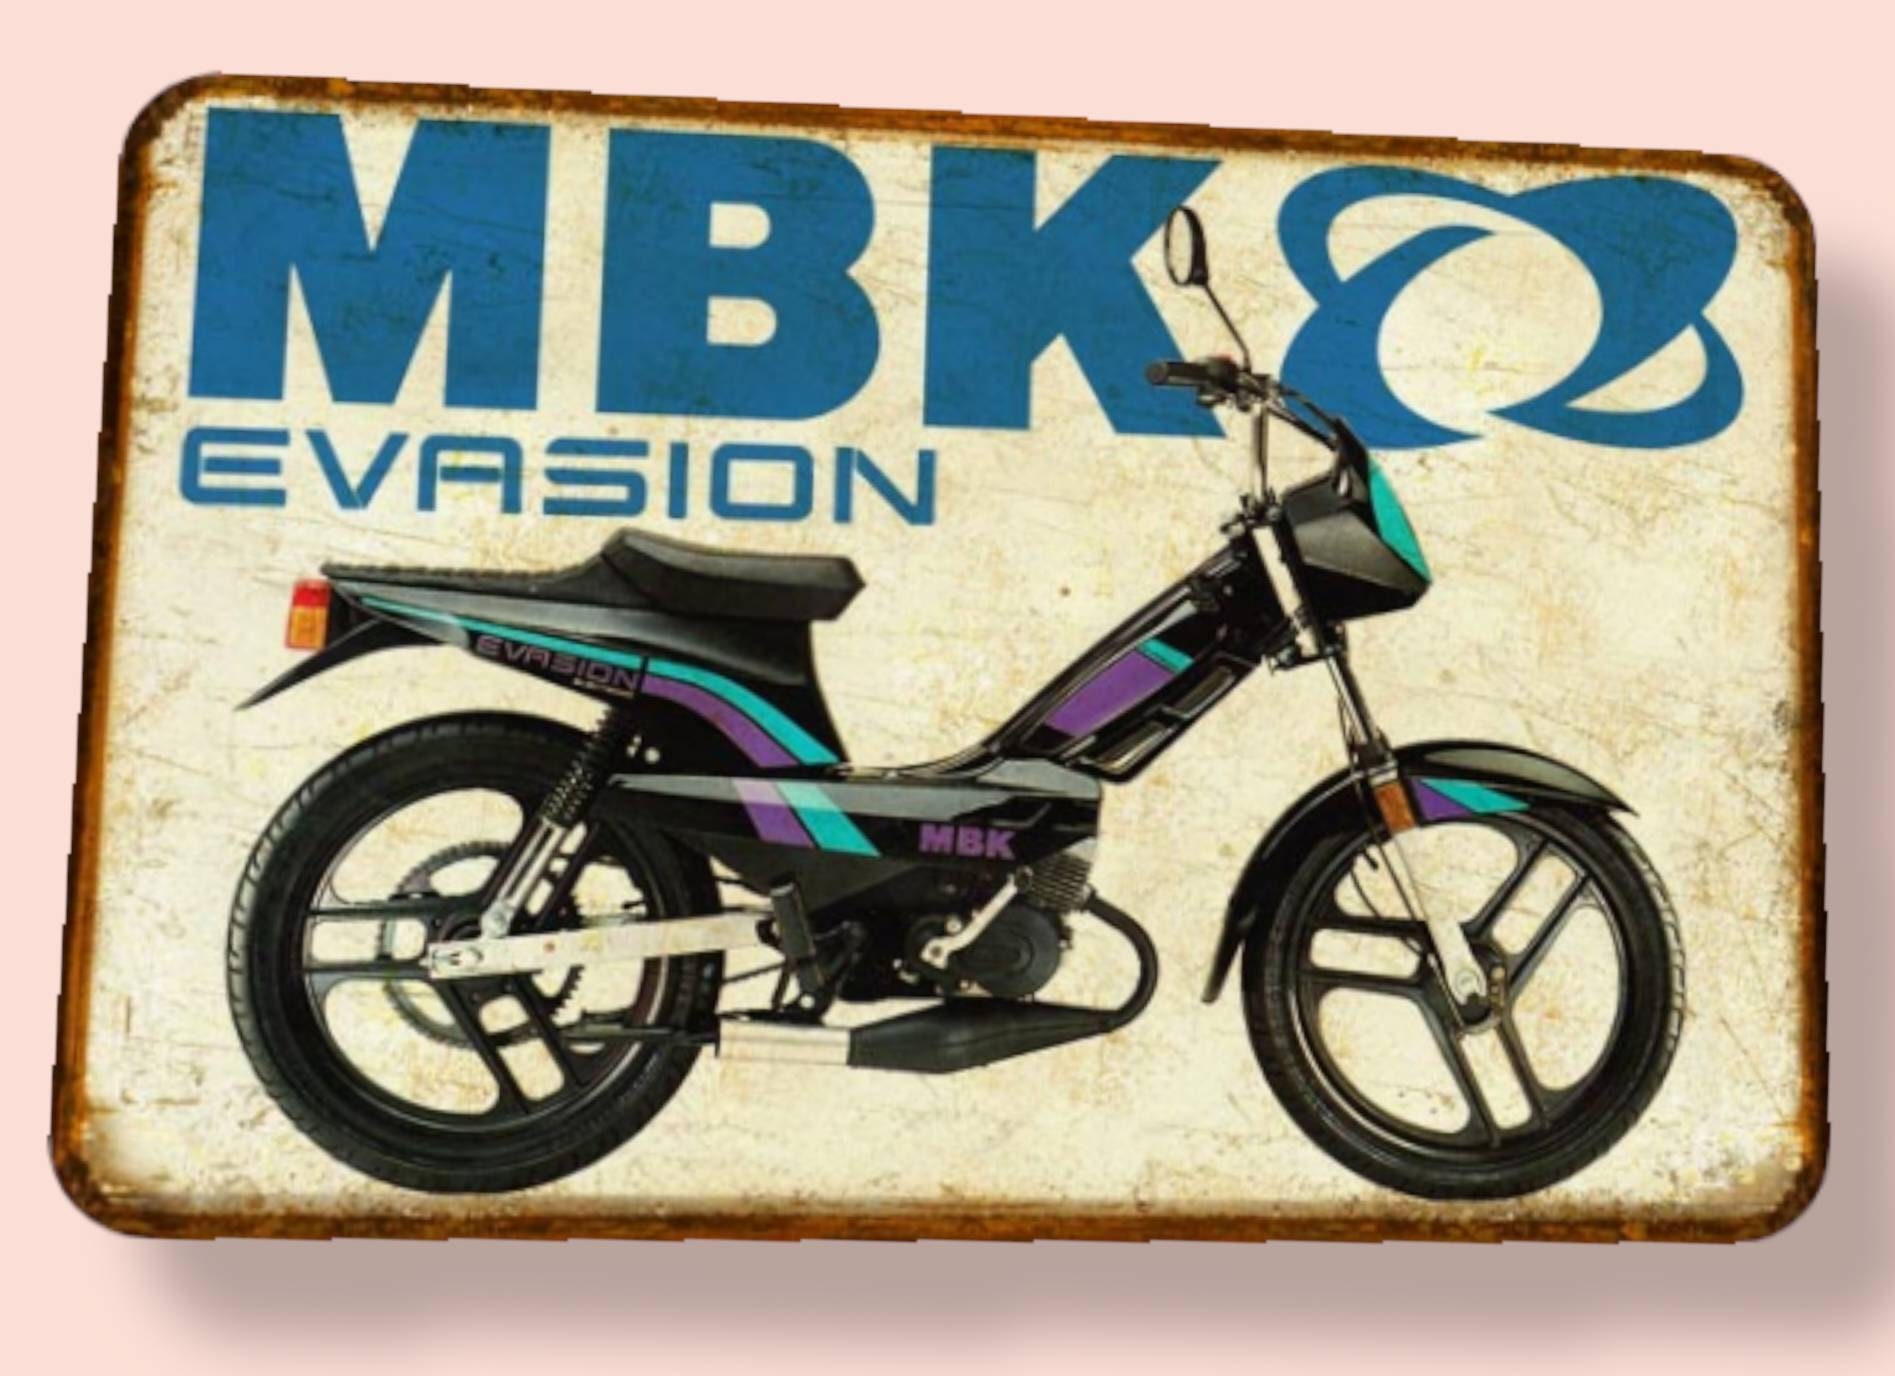 Keychain MBK 51 Moped